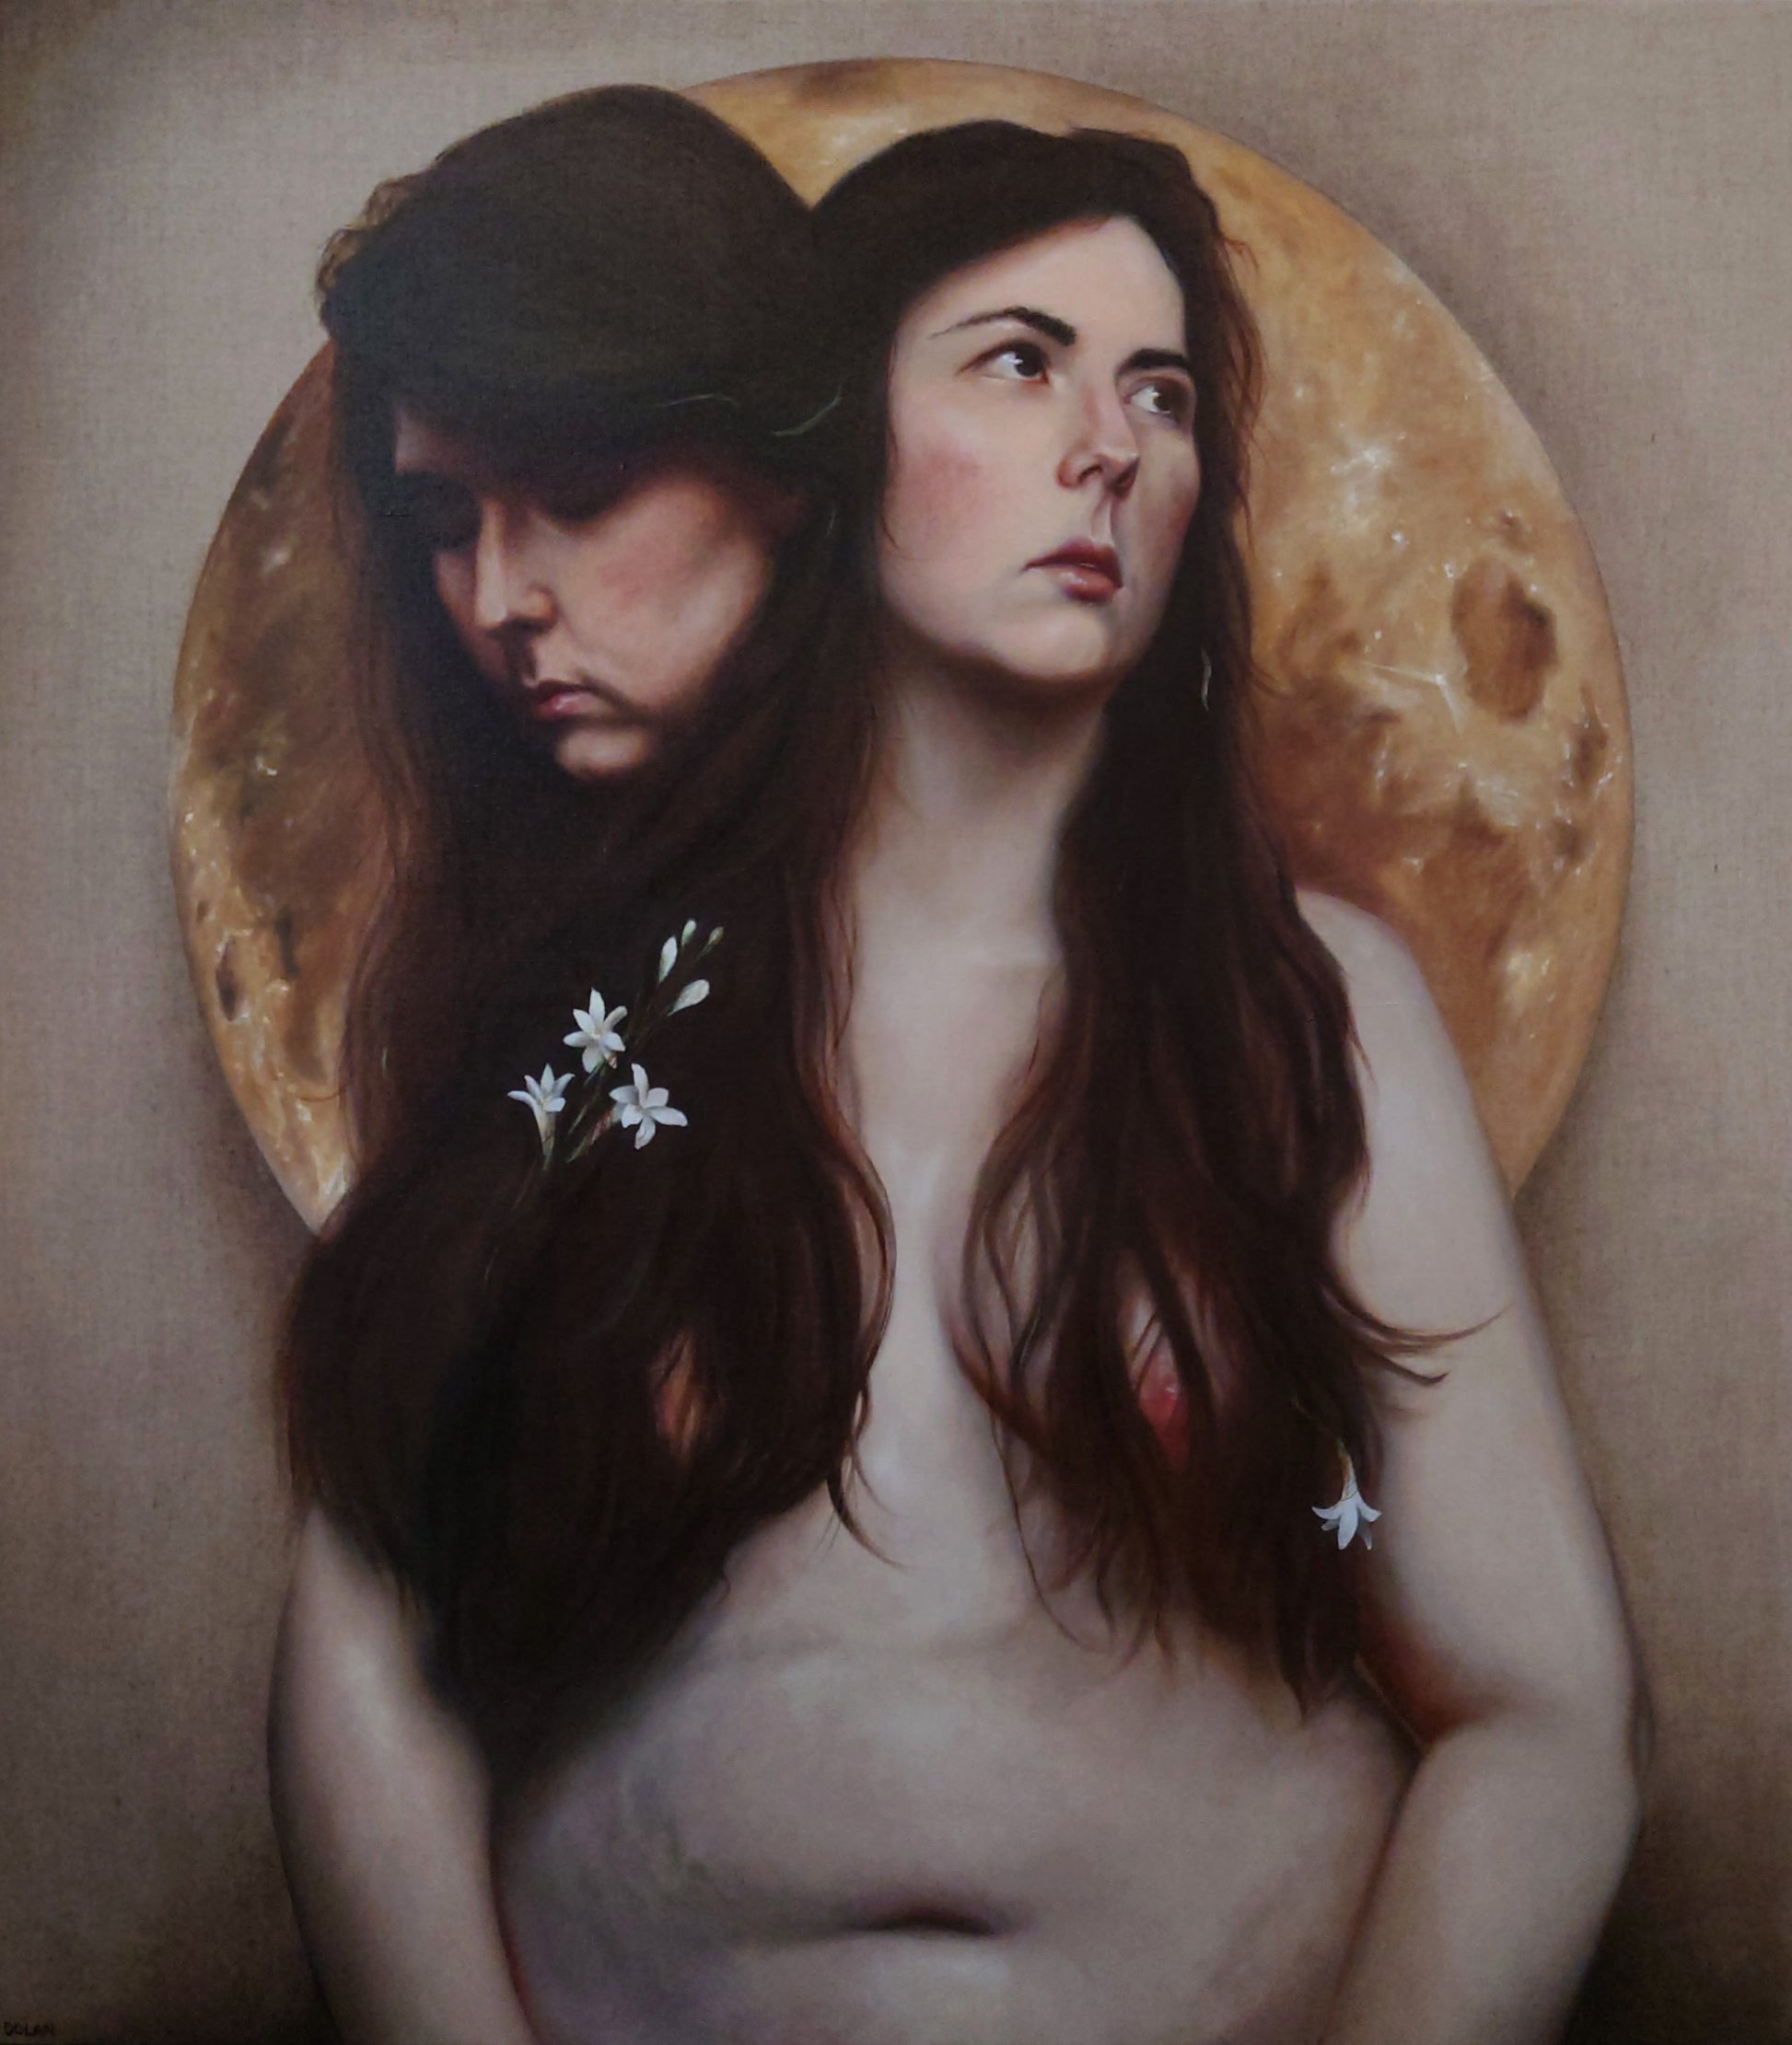 Oil painting of a two headed woman with long brown hair that is decorated with tuberose flowers. She is topless and her skin is glowing in the light of the full moon behind her.